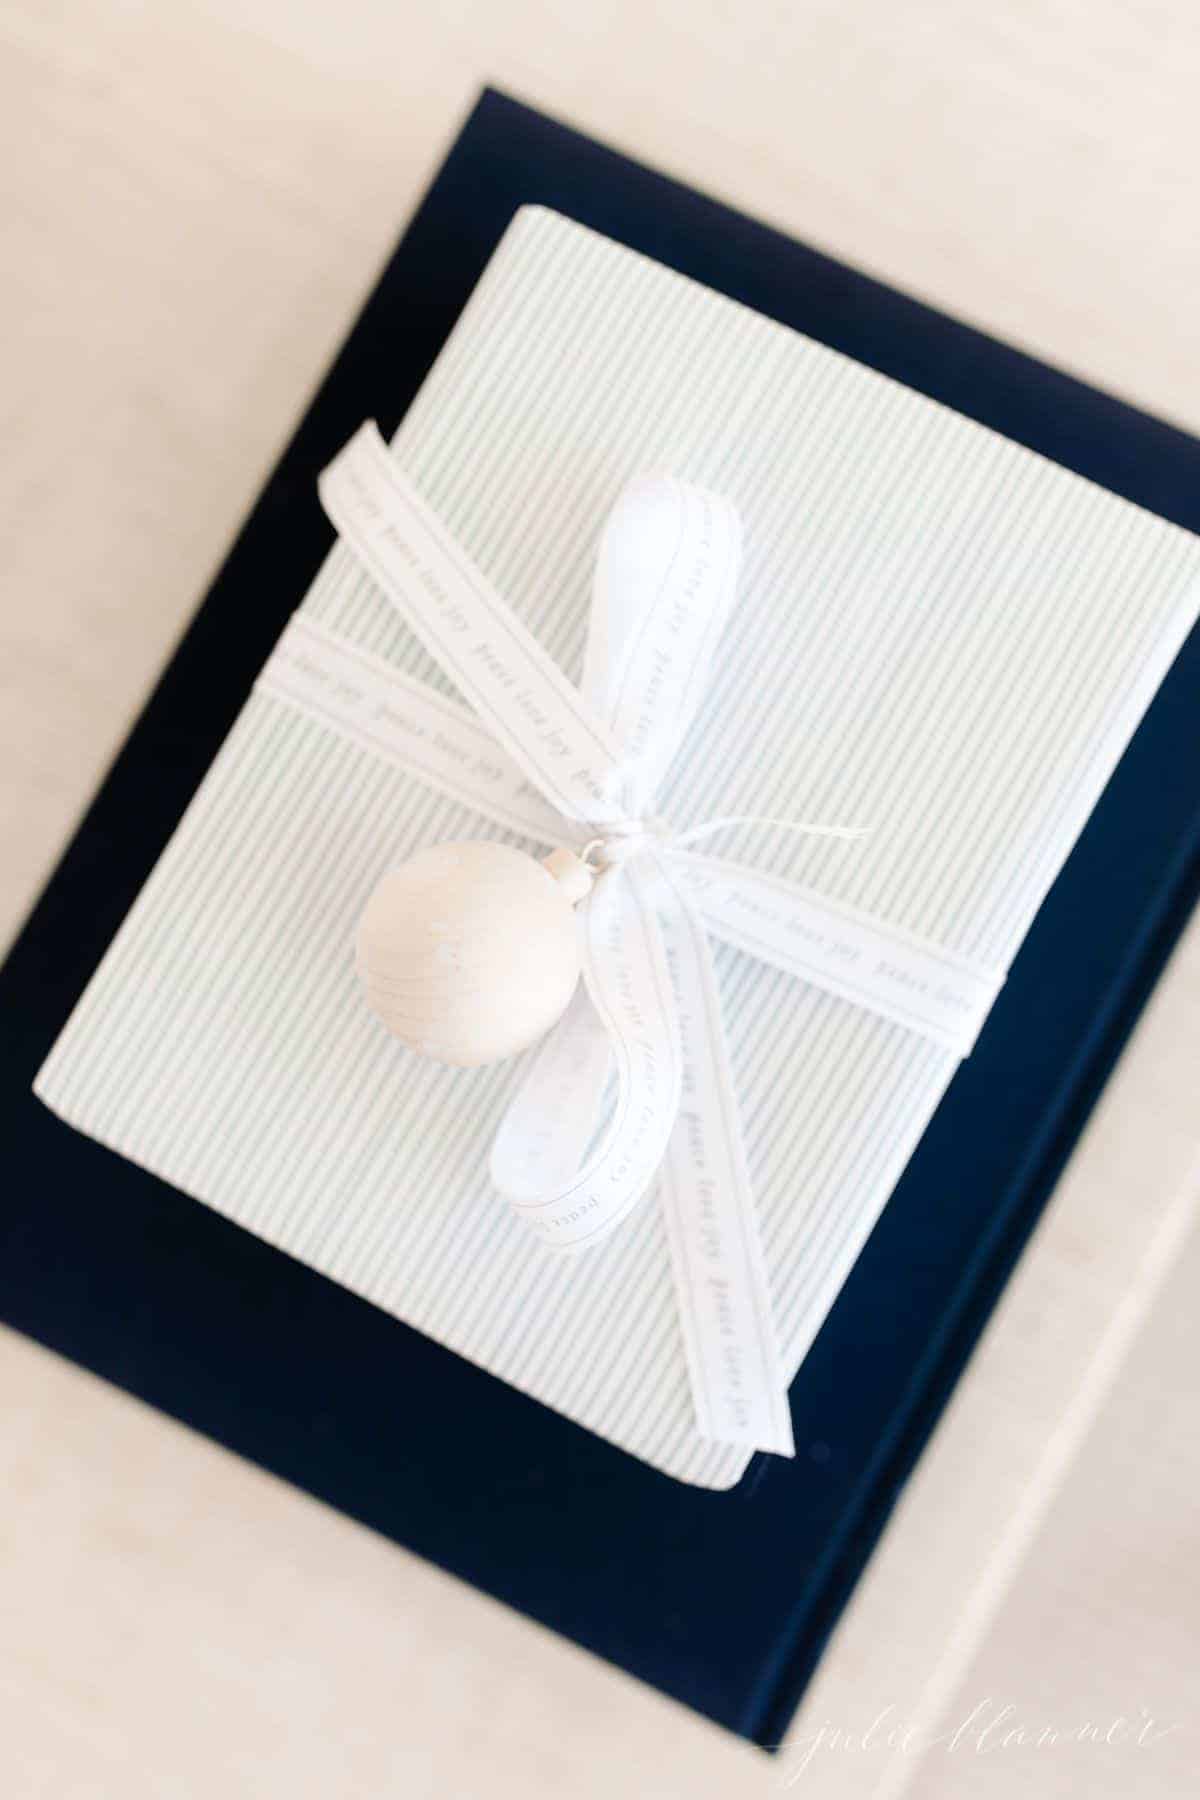 A blue and white christmas gift wrapping box tied with a bow, on top of a navy blue book.